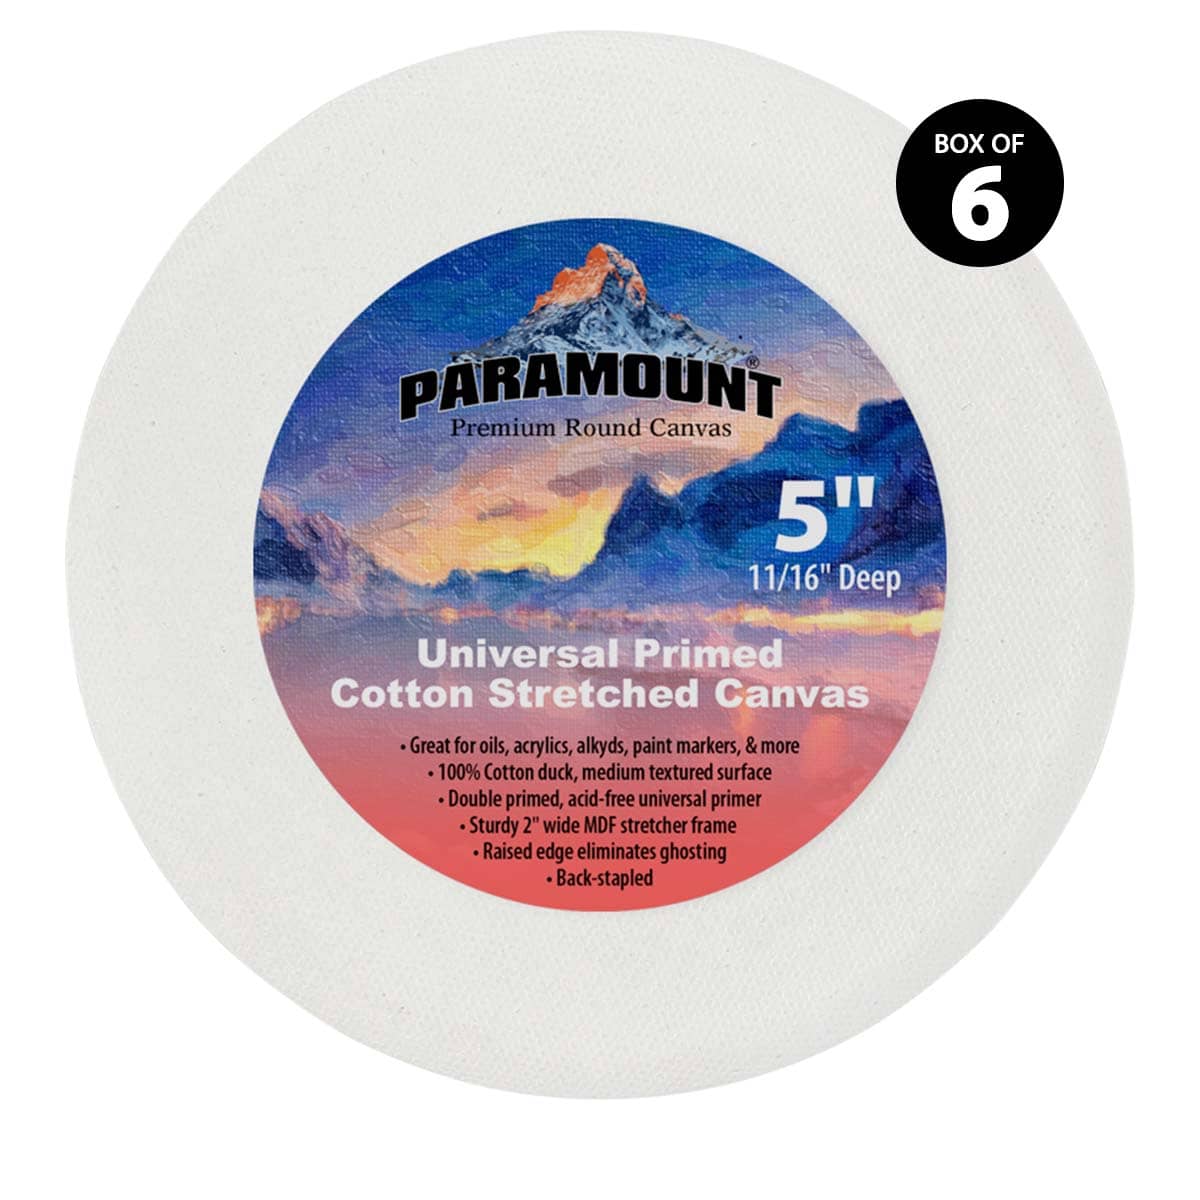 Paramount Oval and Round Canvas - Boxes of 6